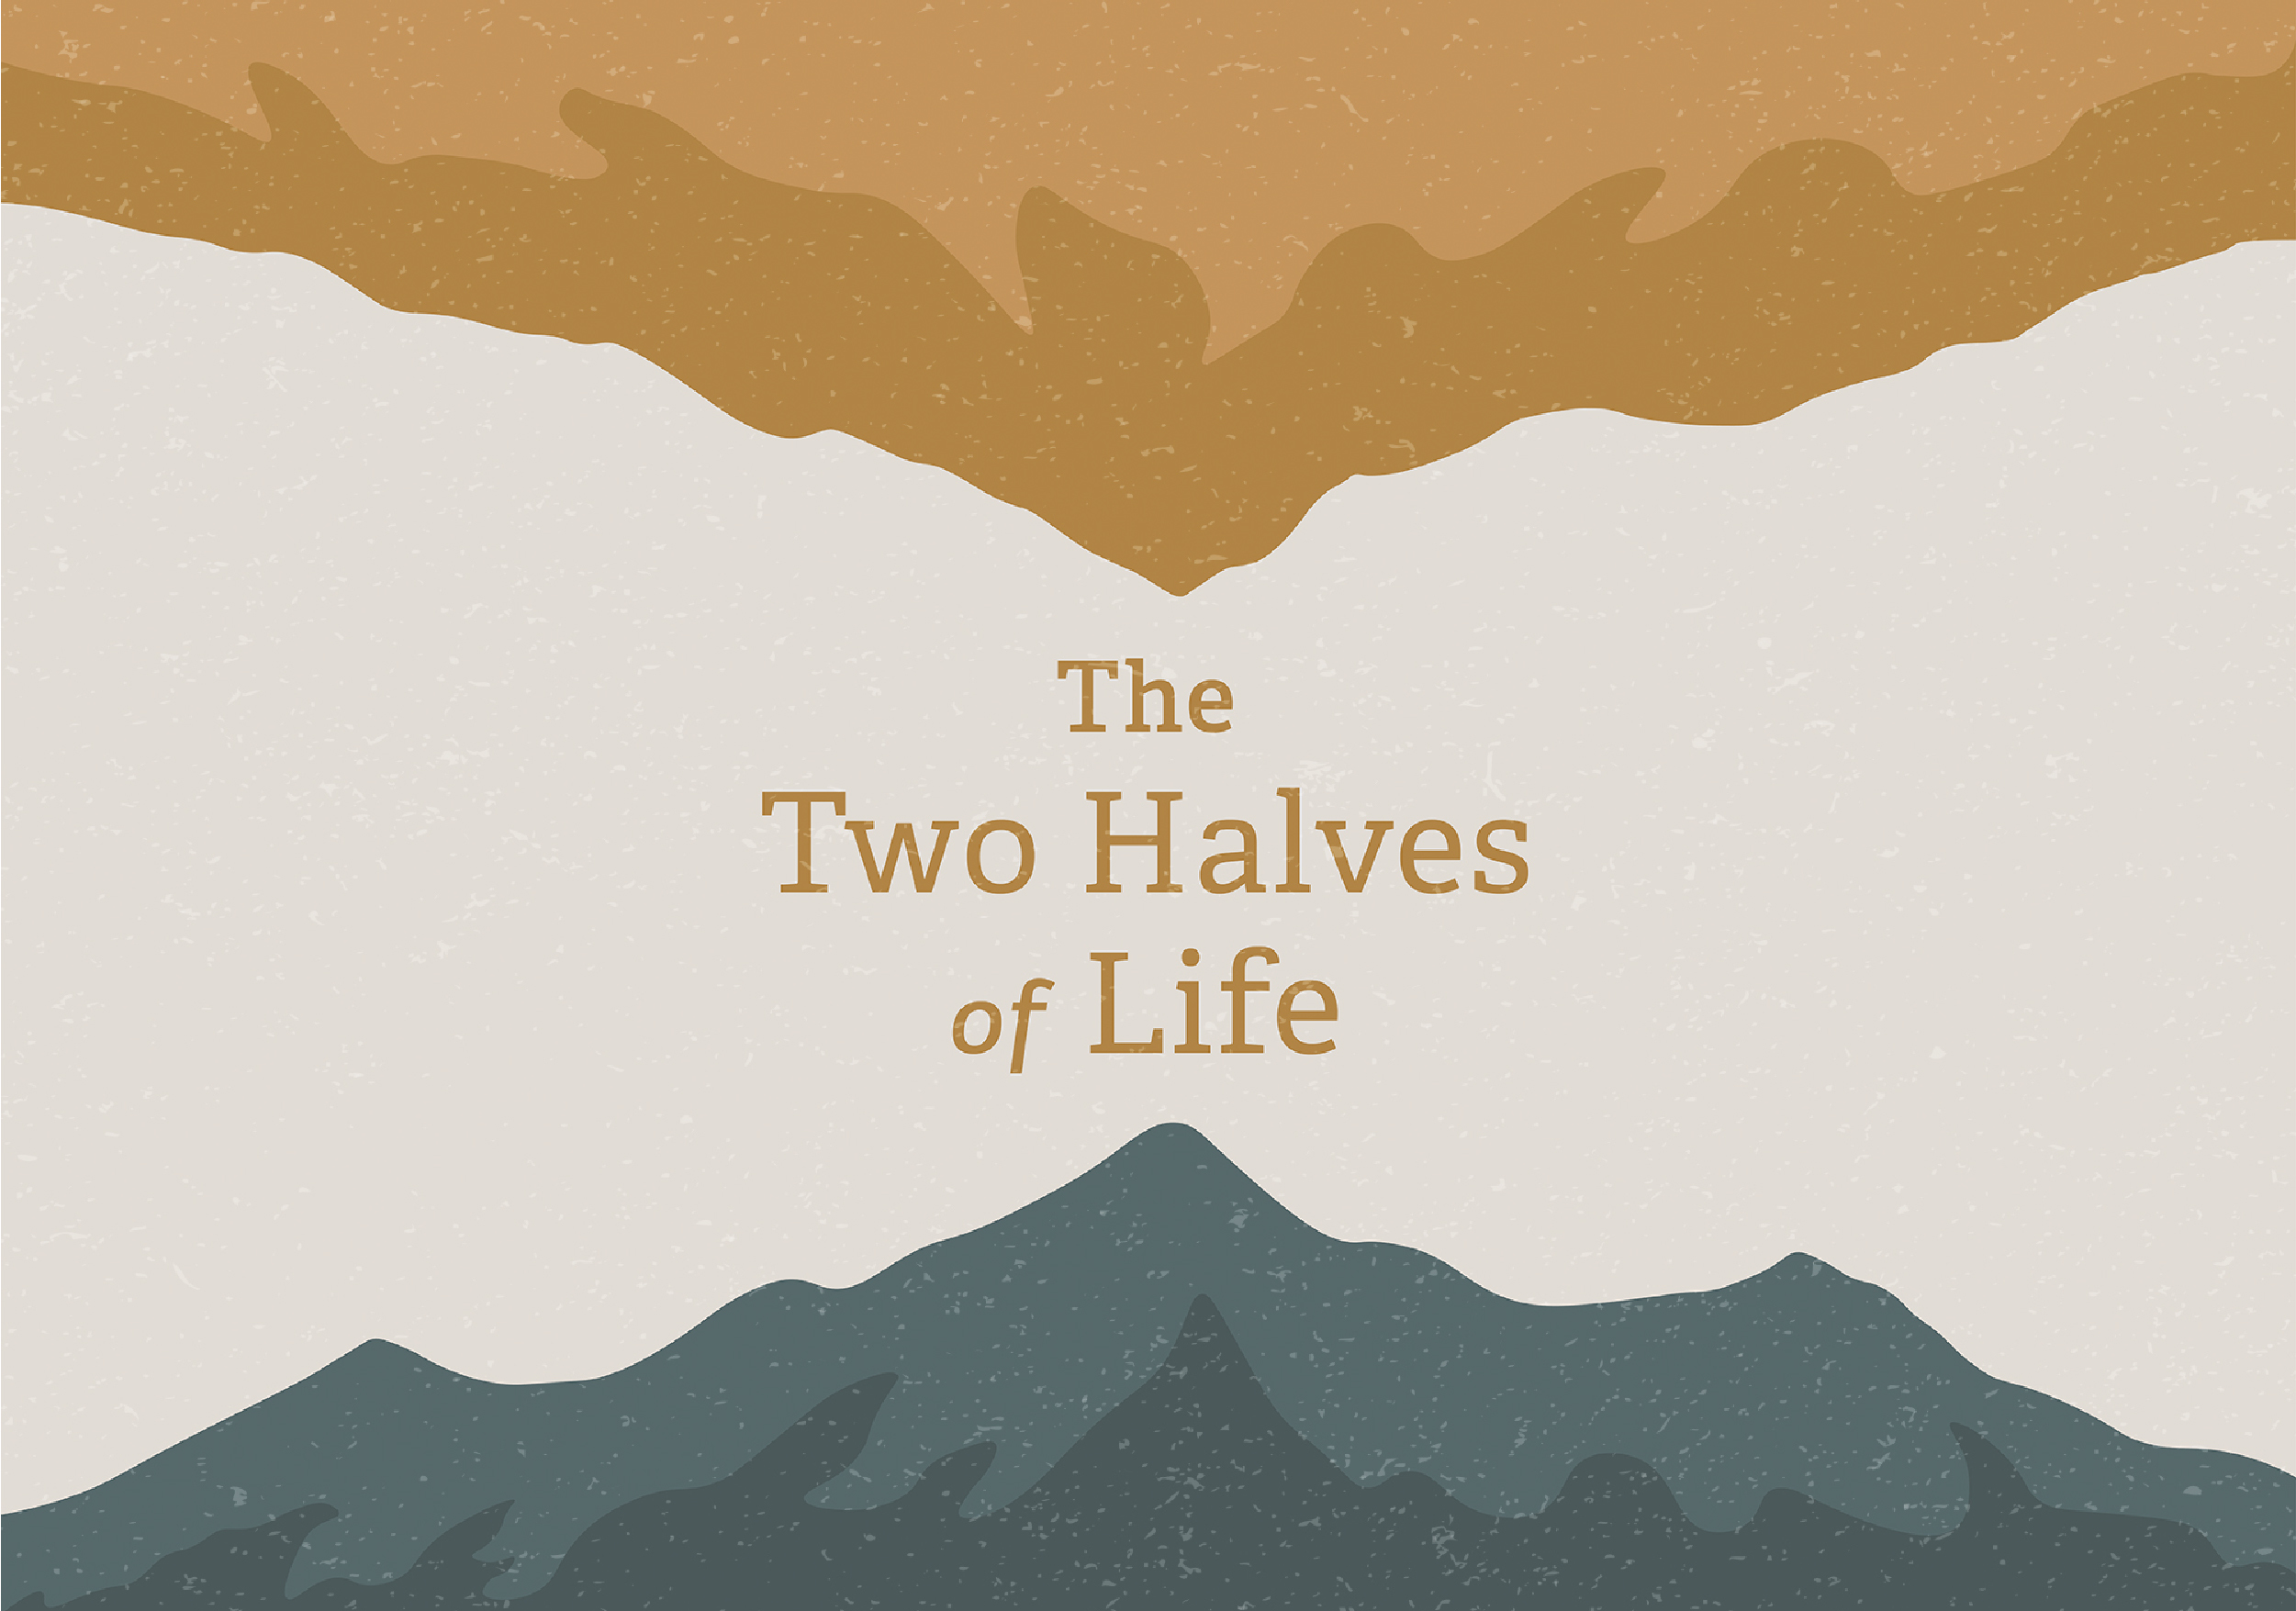 The Two Halves of Life